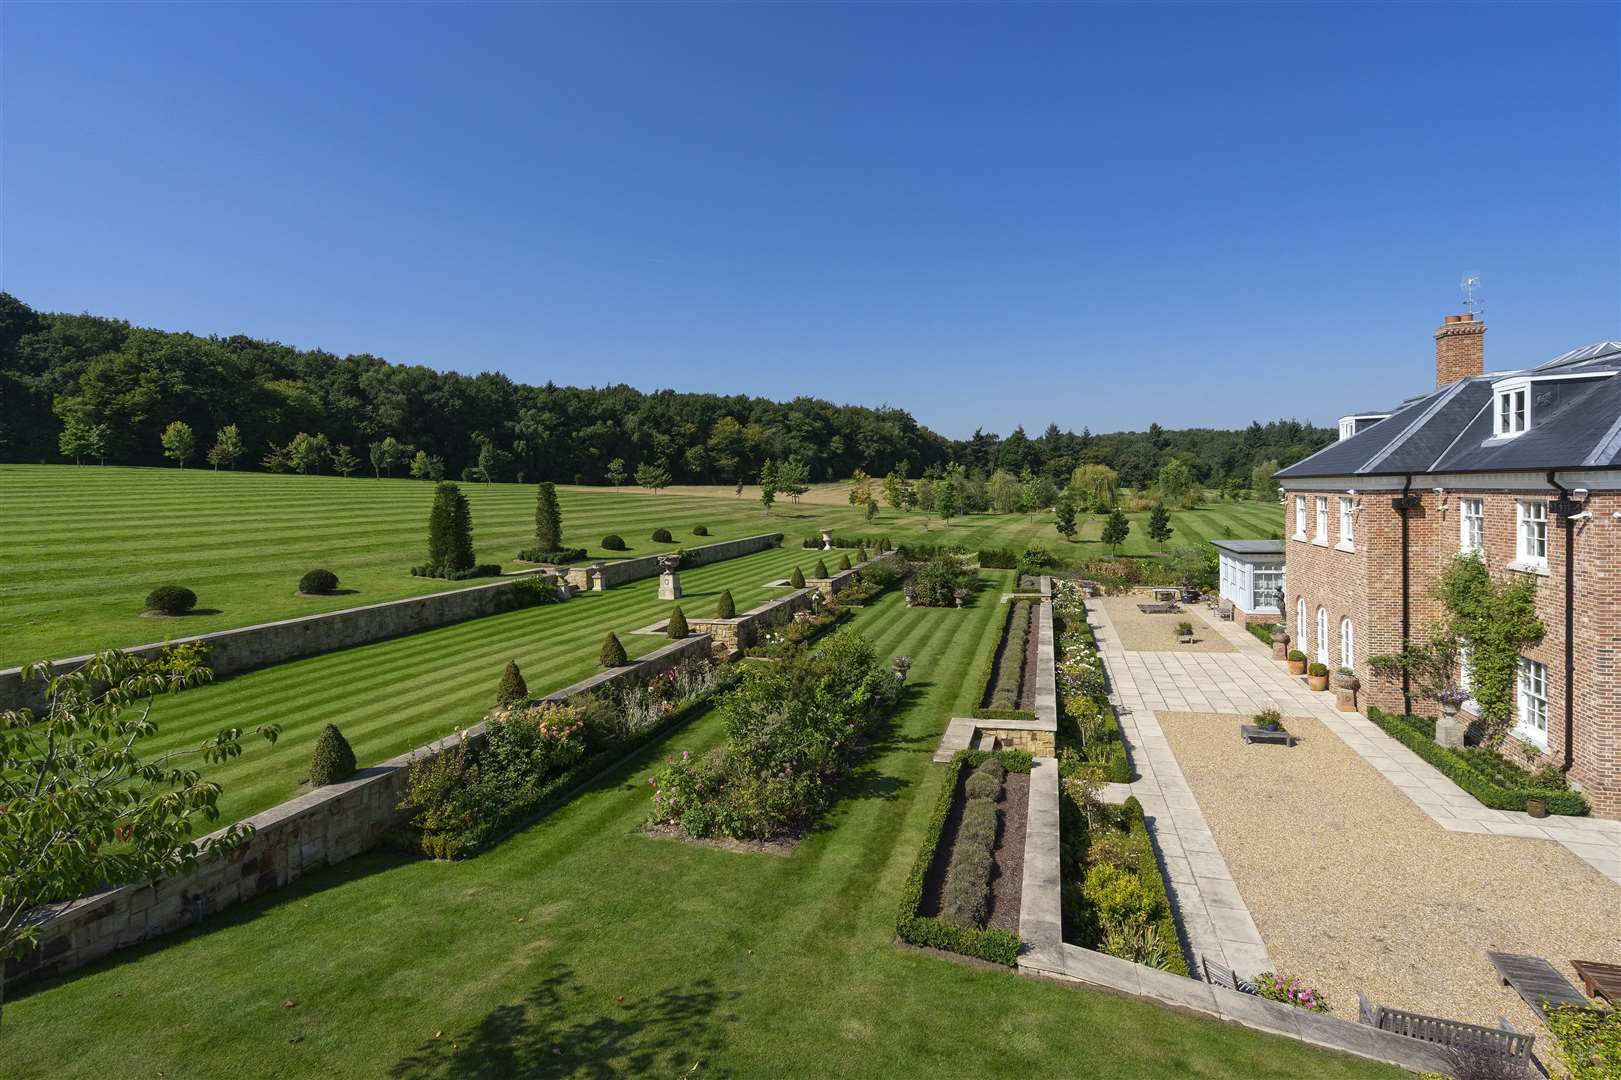 Hookwood Farm comes with beautifully manicured gardens and grounds